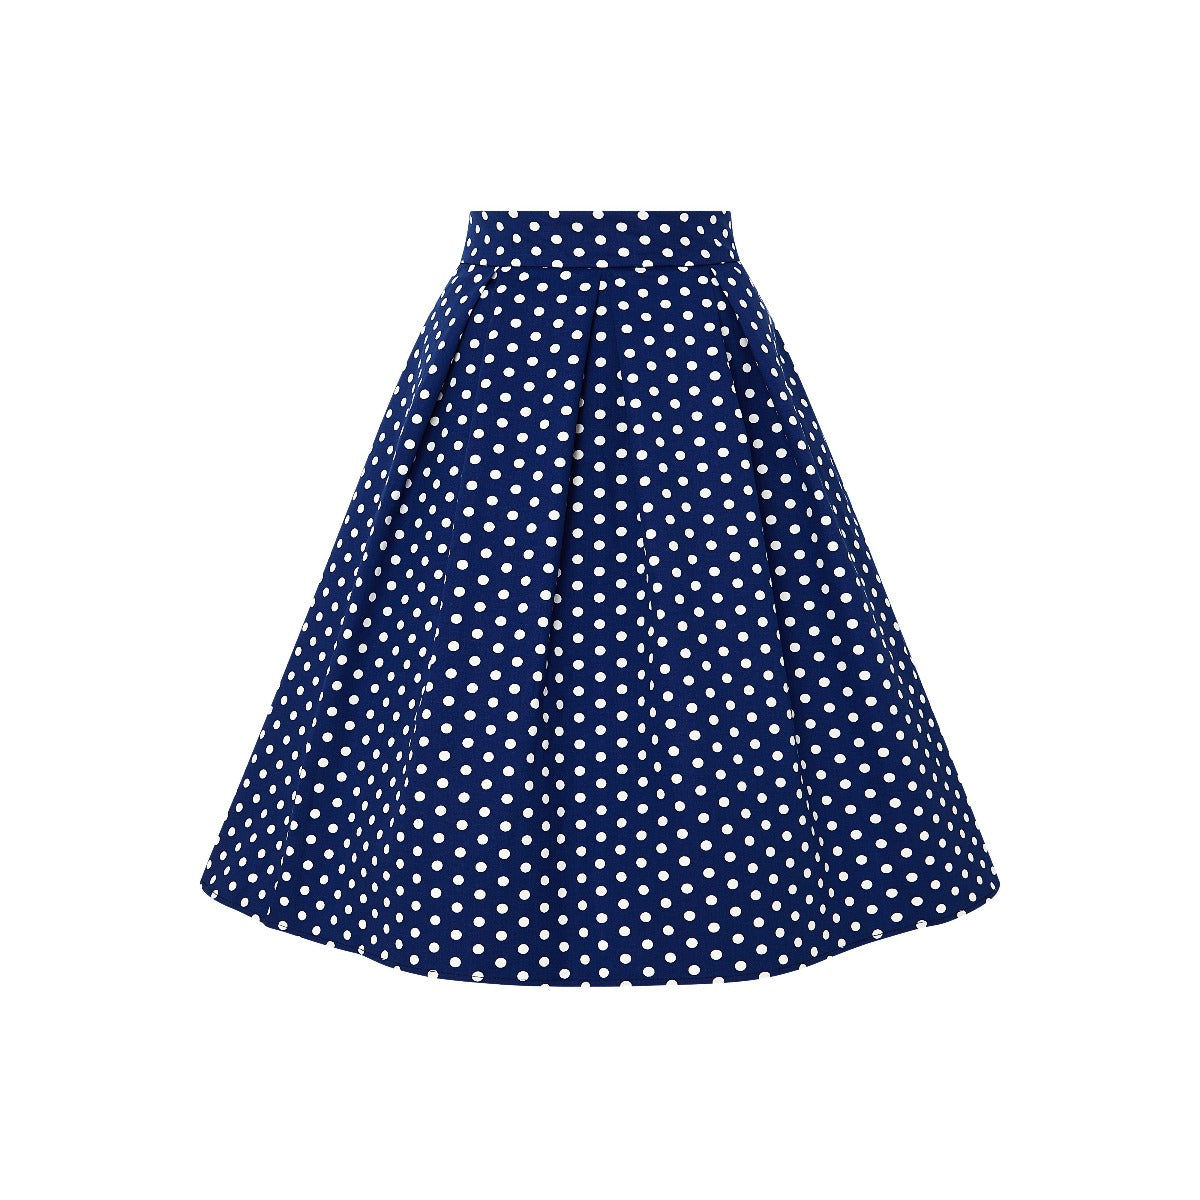 Our black top and dark blue polka dot flared skirt, front view